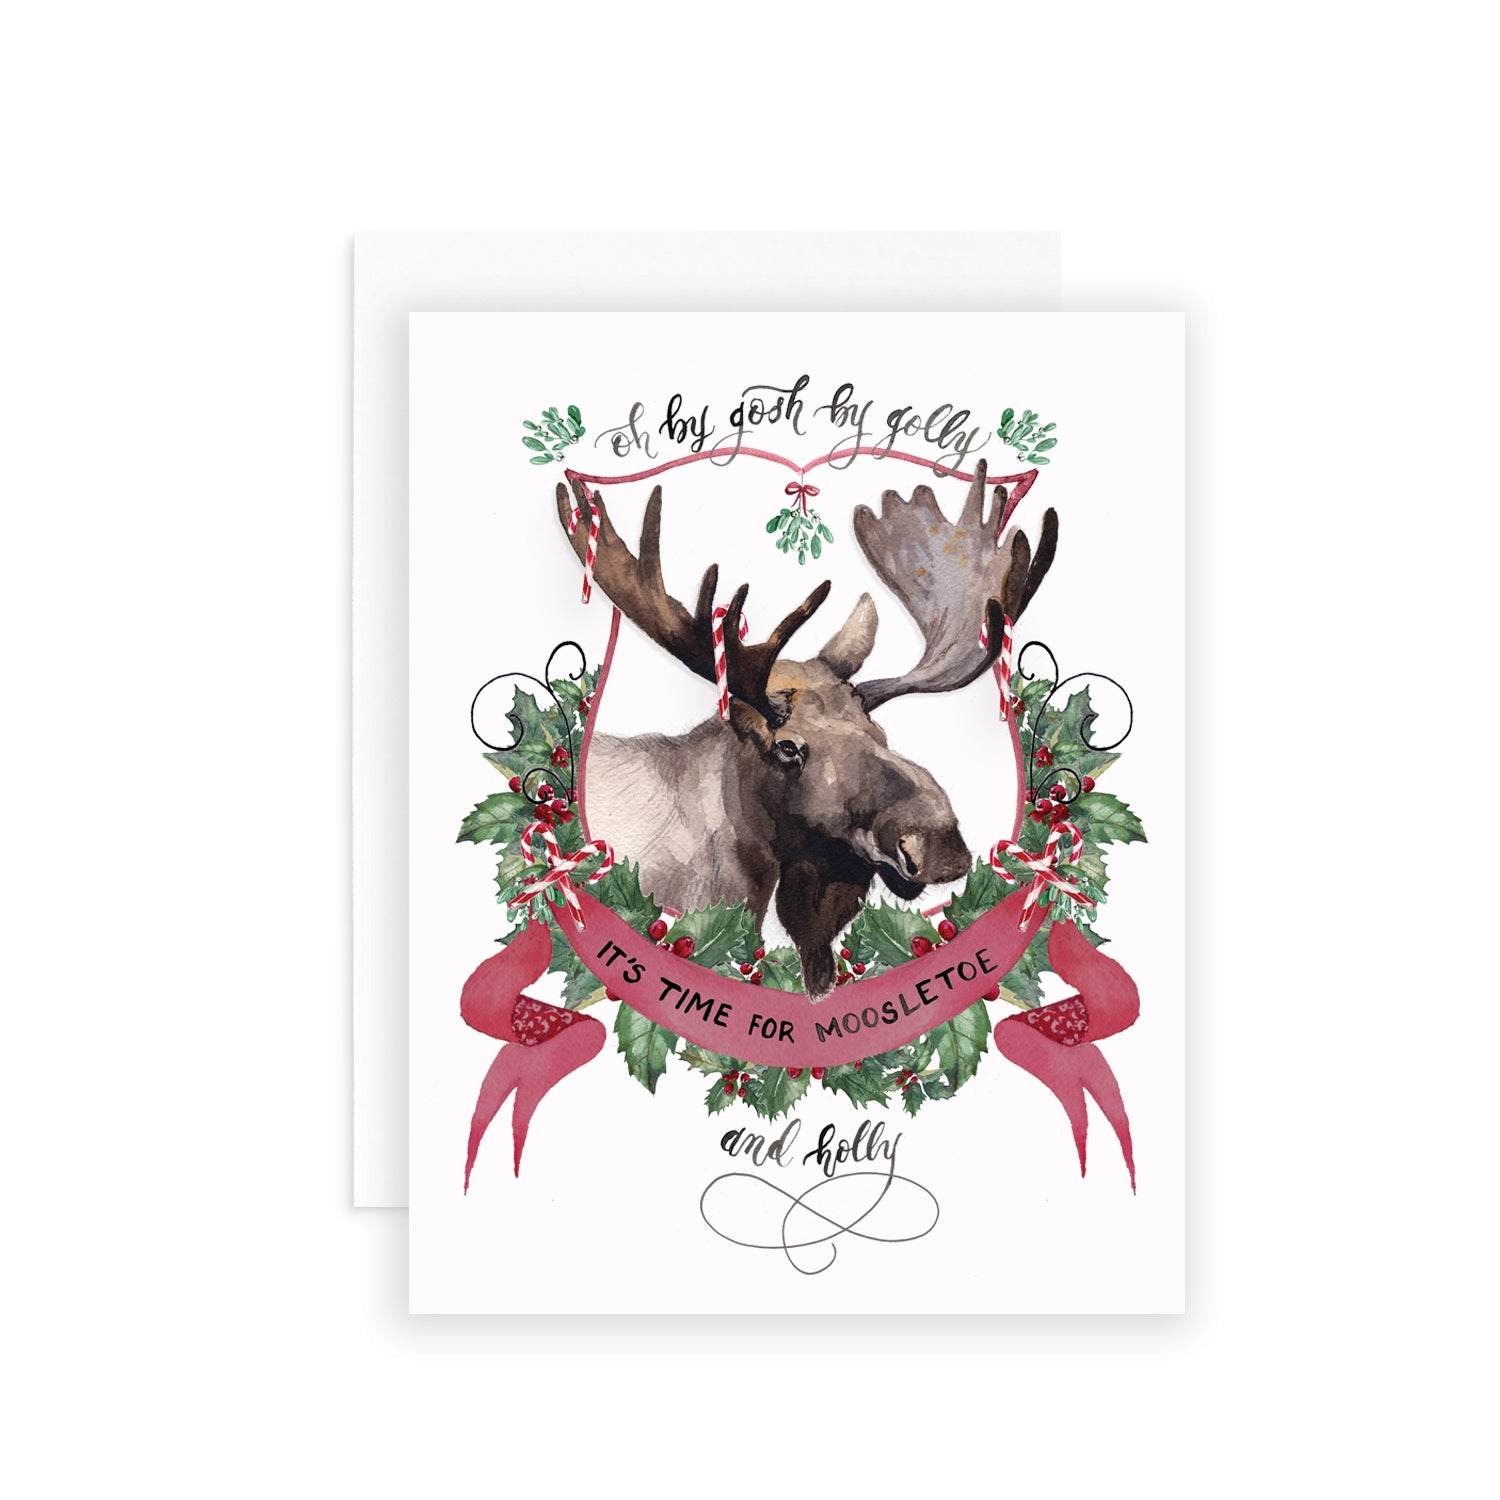 Moosletoe and Holly Greeting Card